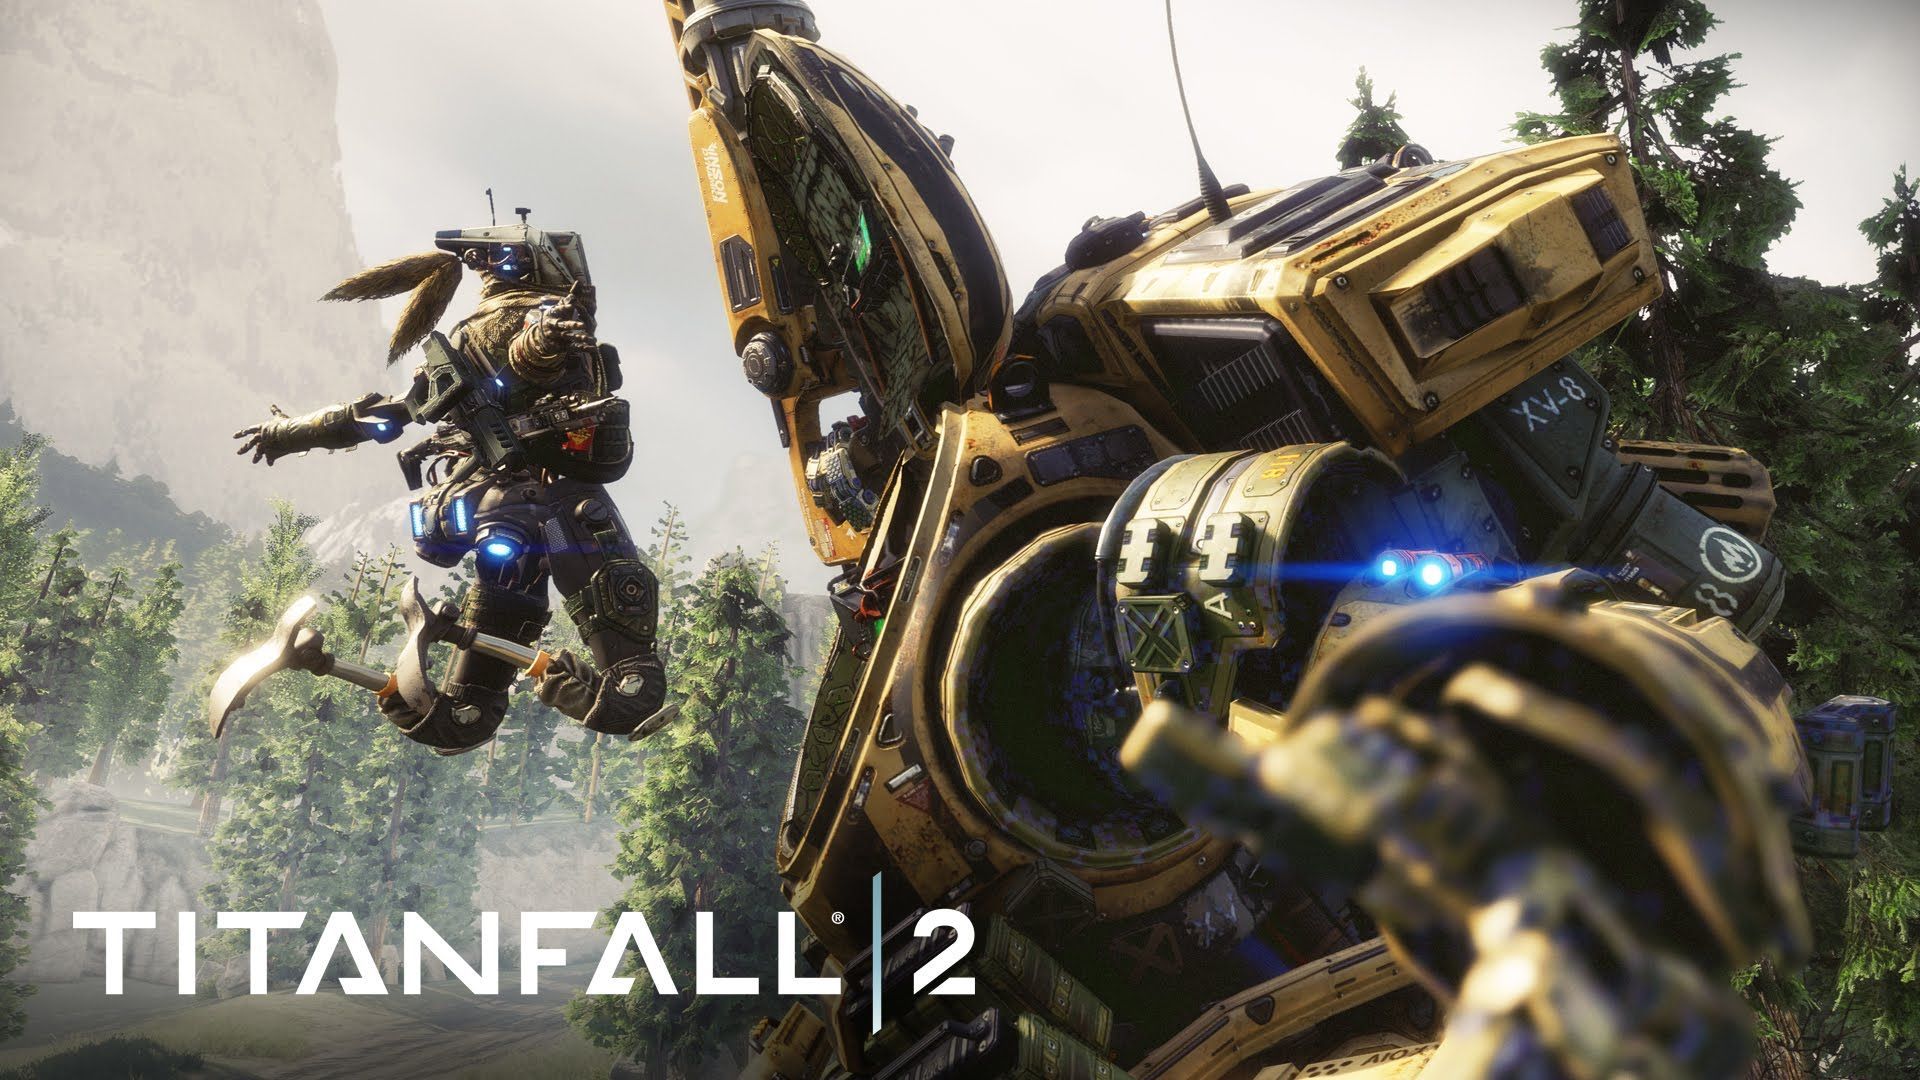 Titanfall 2 Official Multiplayer Gameplay. Xbox one